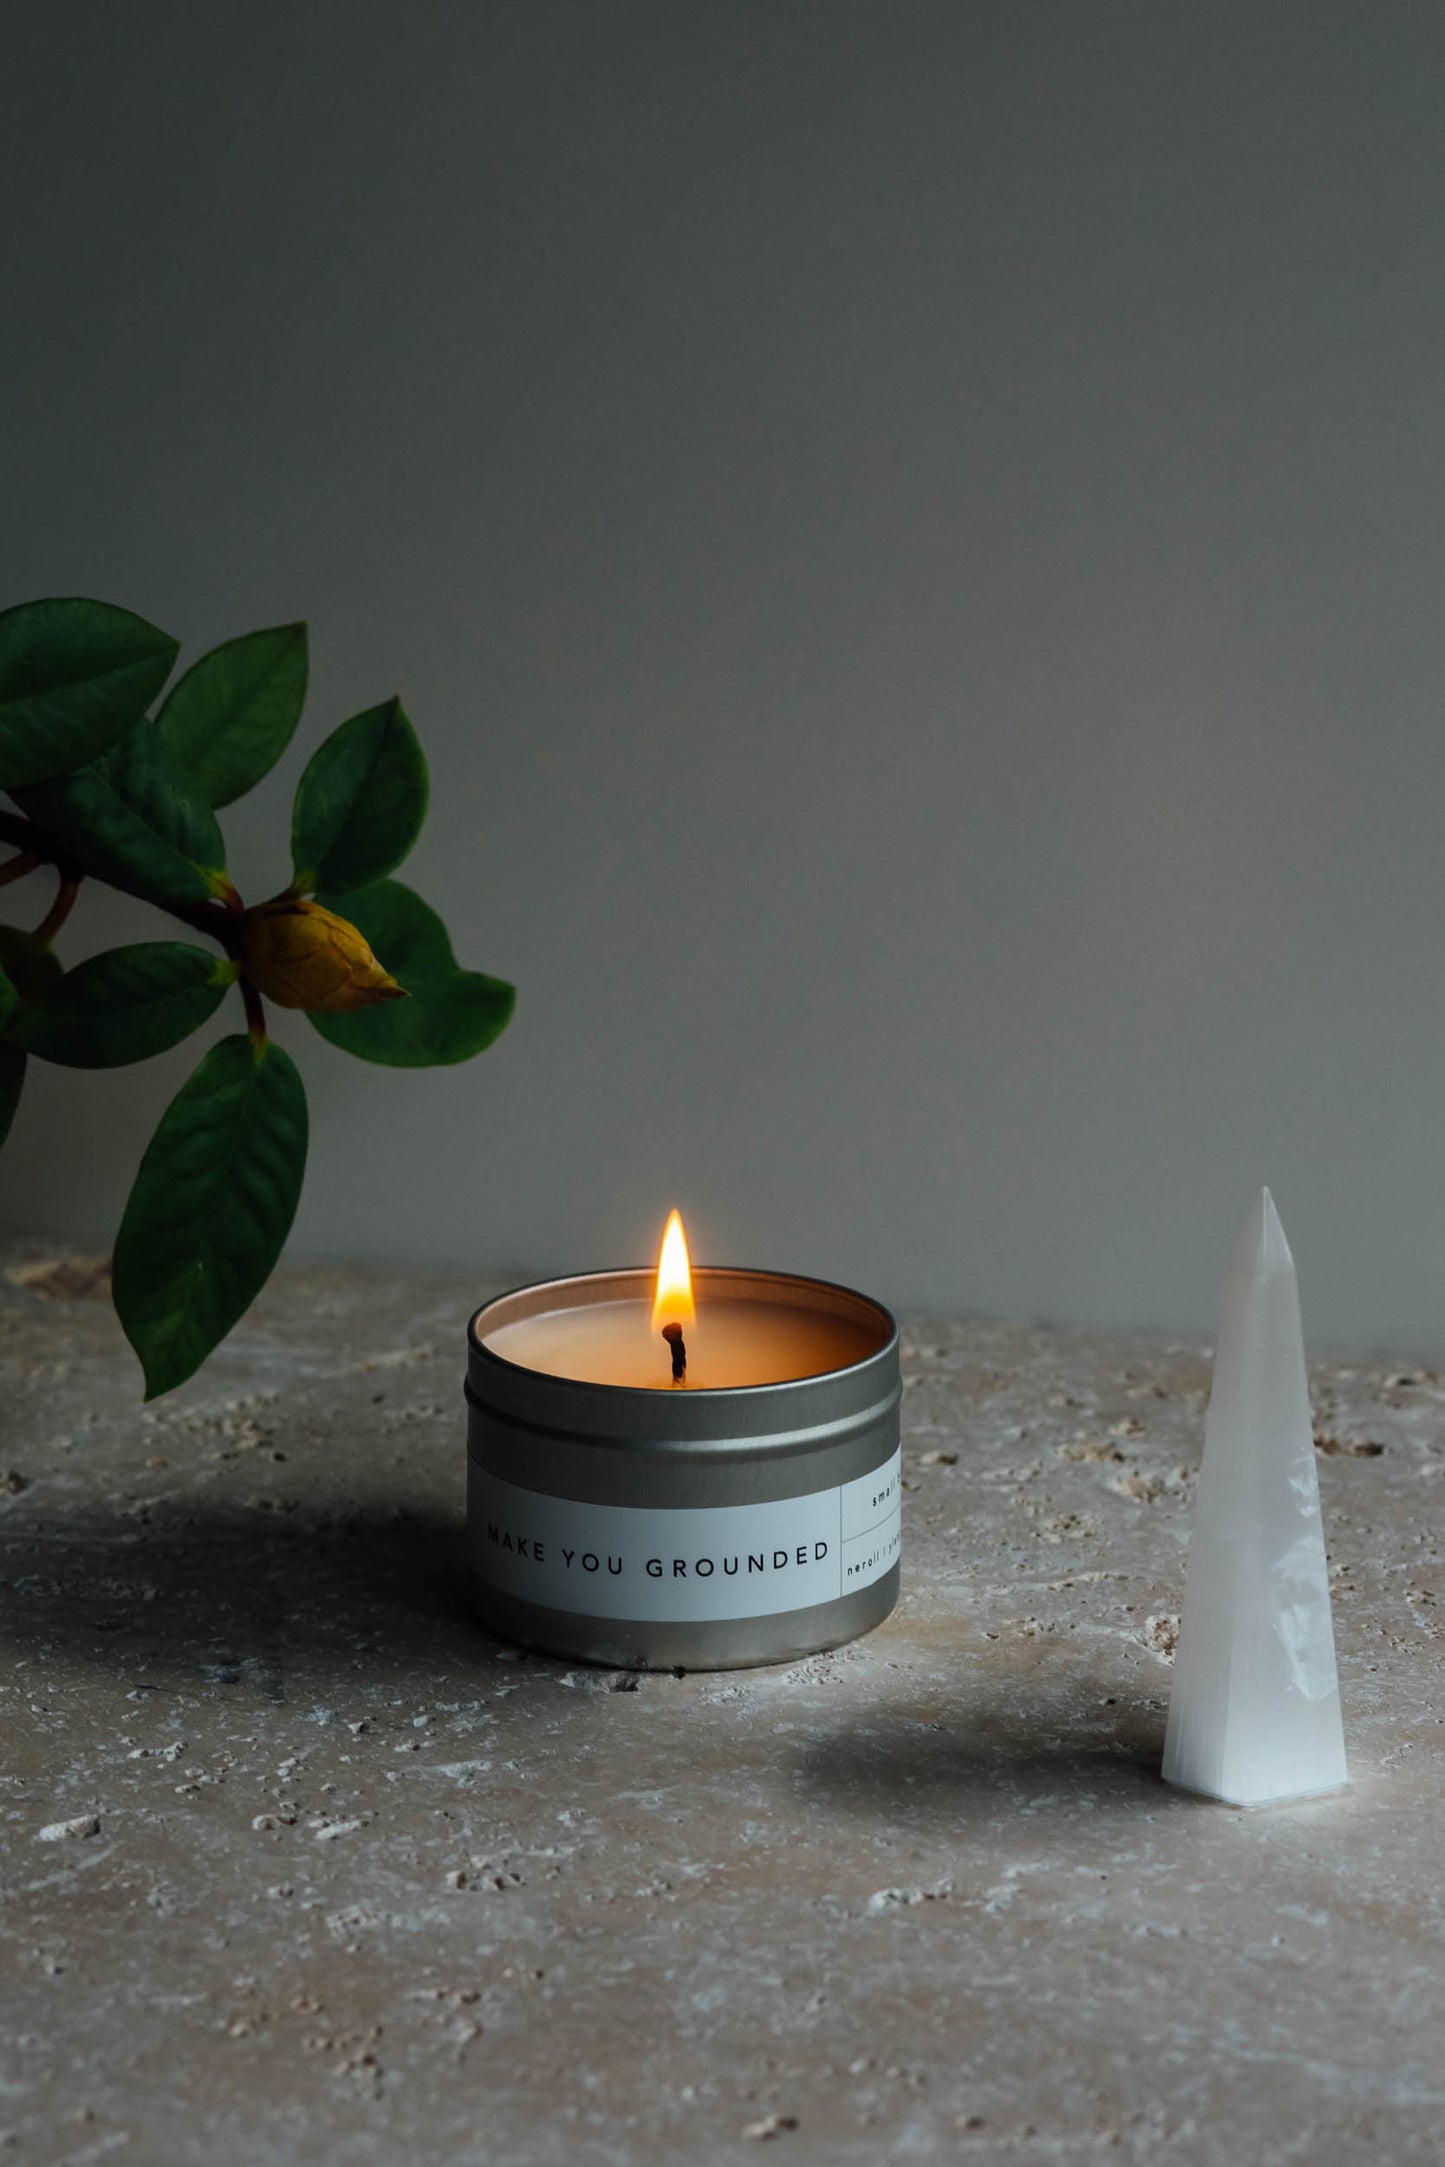 Make You Grounded | Small Meditation Candle